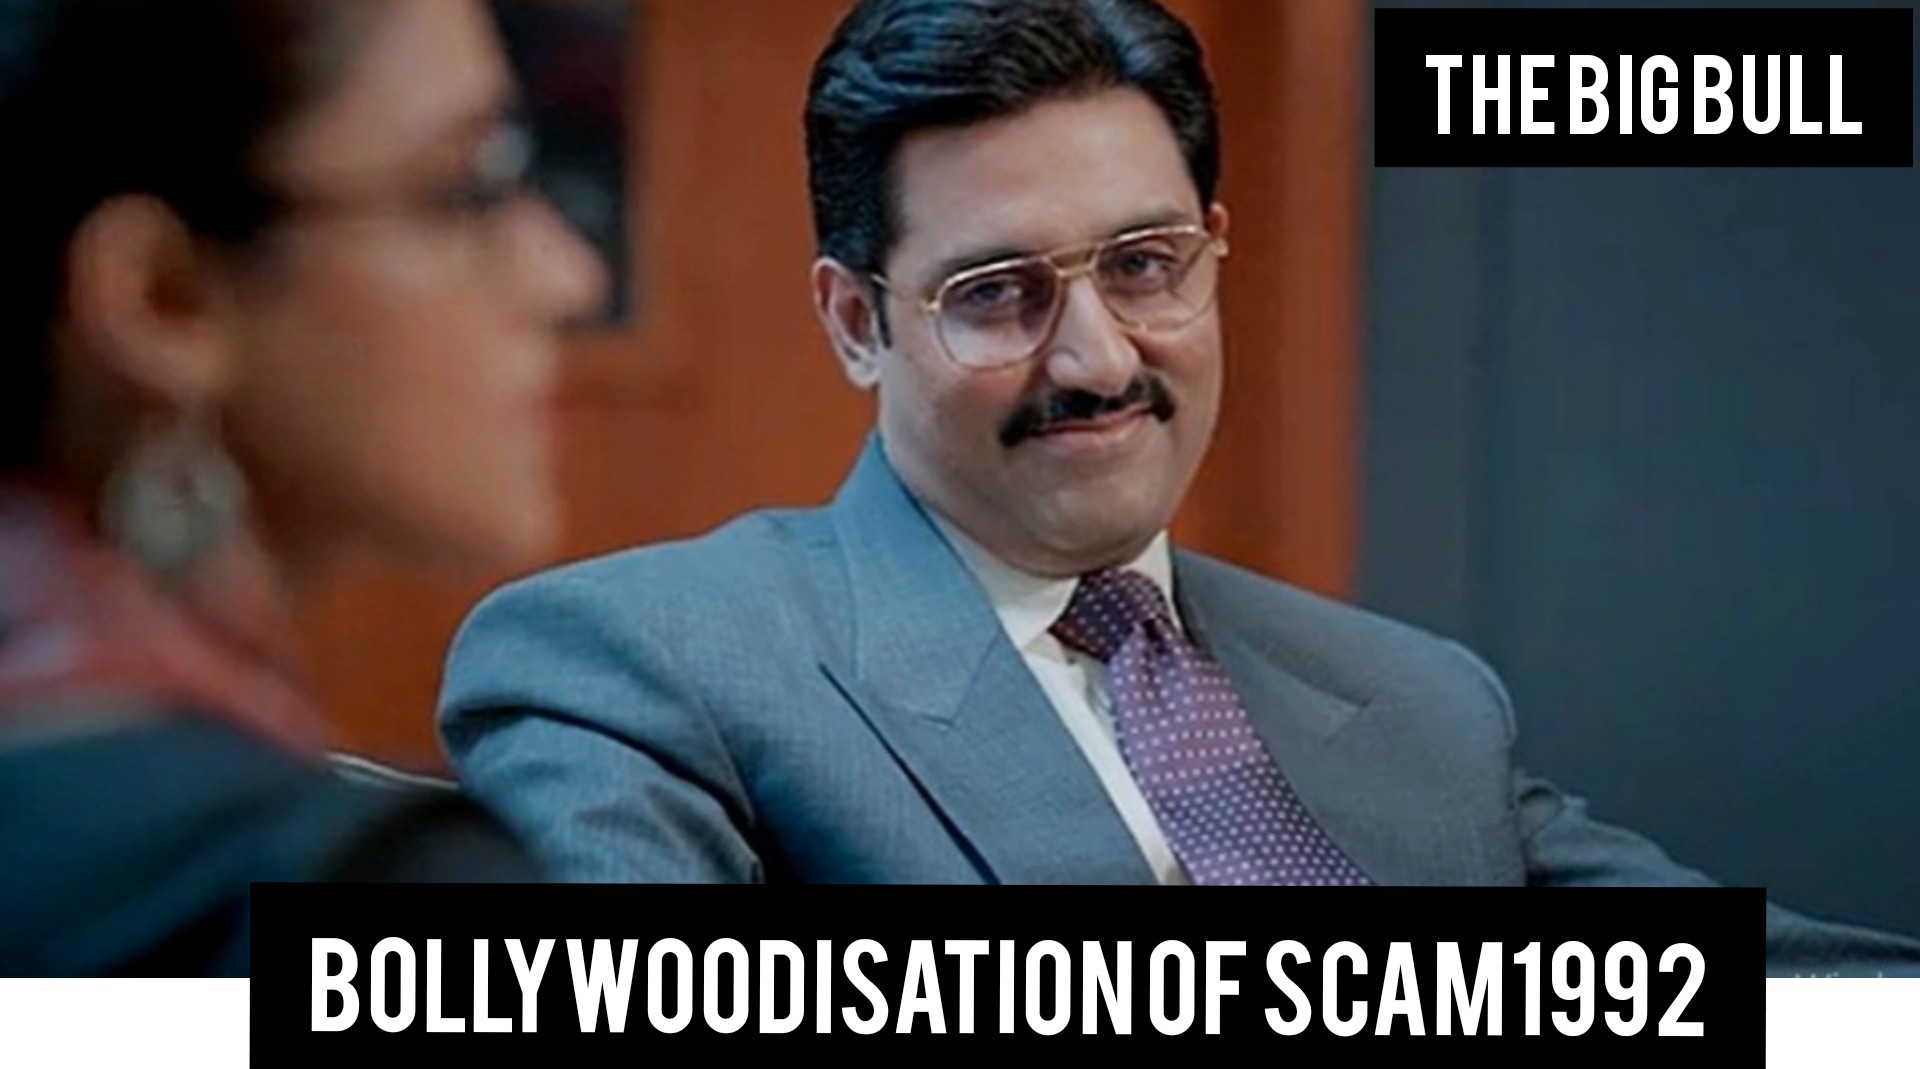 The Big Bull Movie Review: Bollywoodisation of Scam 1992